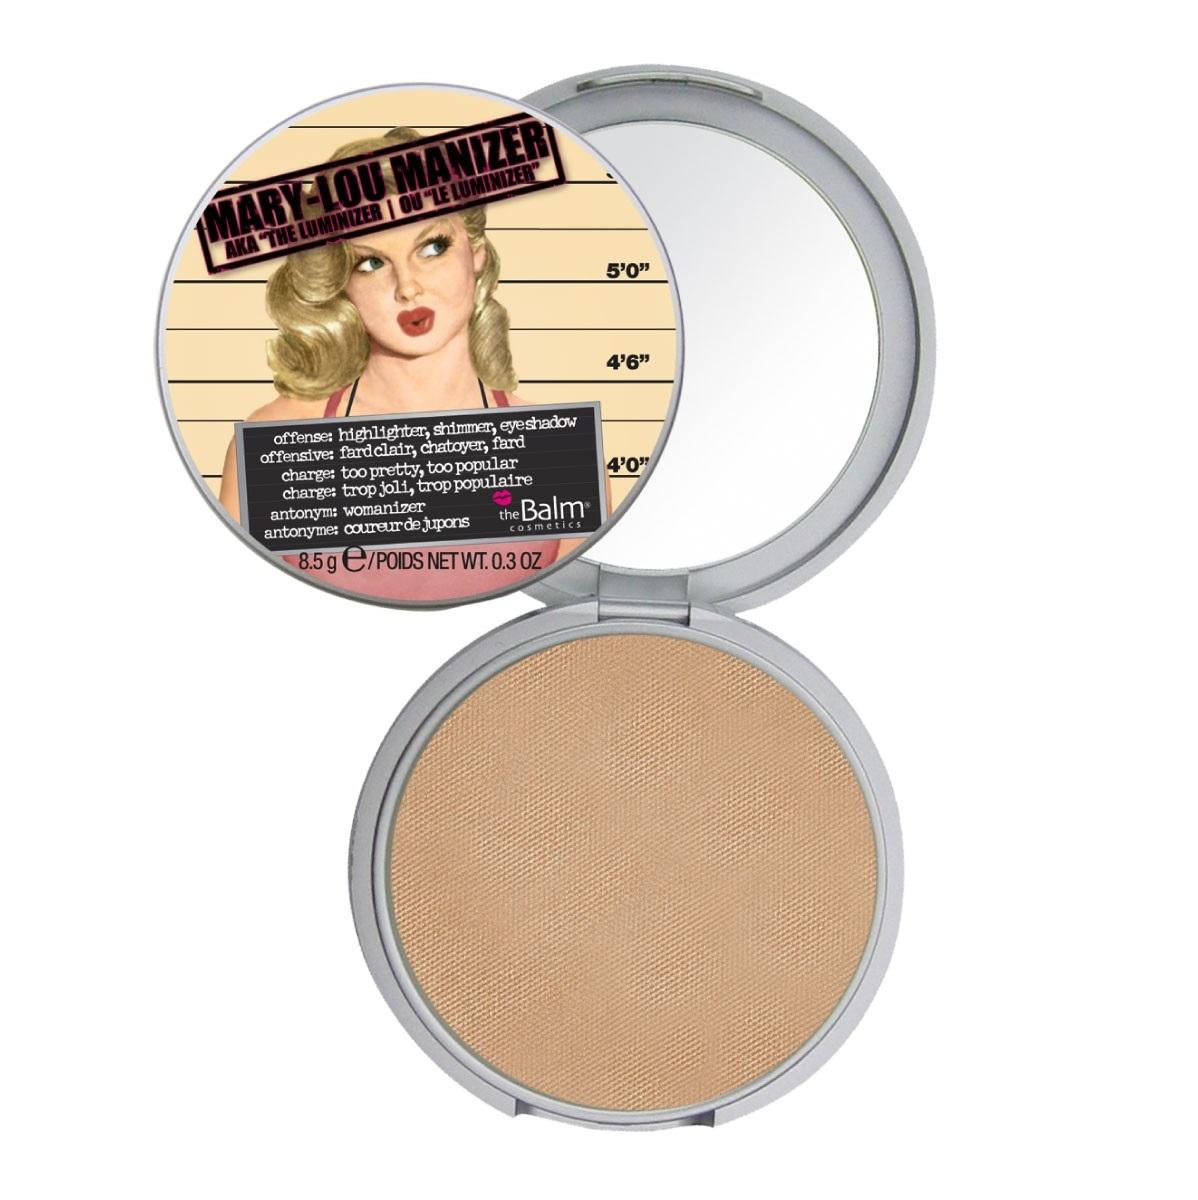 The Balm Highlighter Shimmer Pressed Powder Mary-Lou Manizer